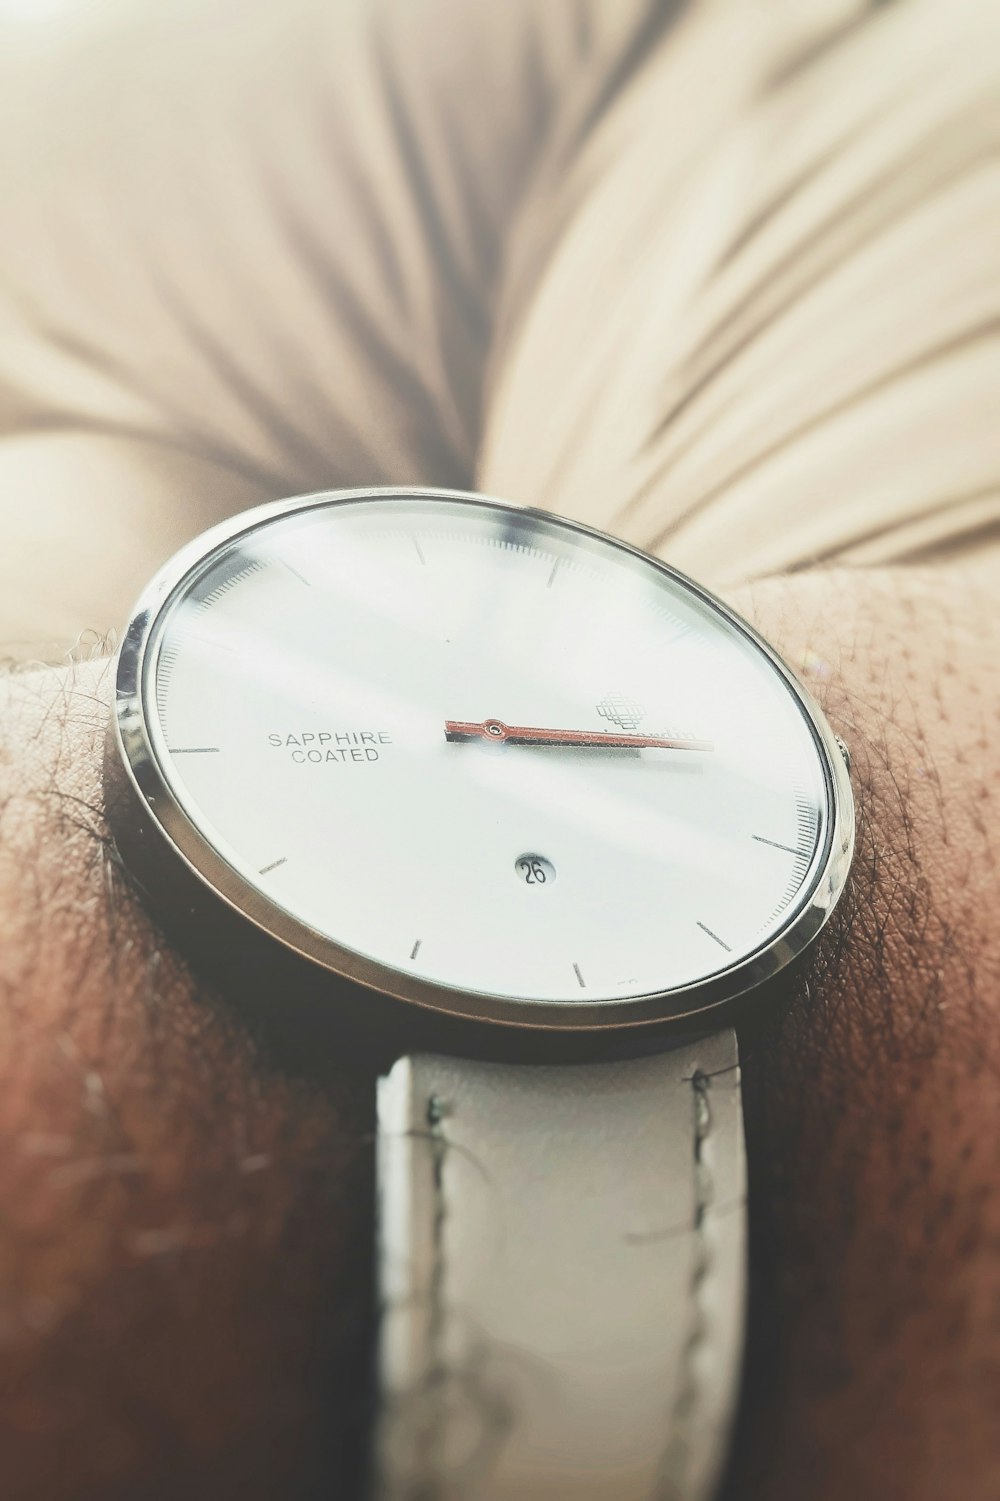 round silver-colored analog watch